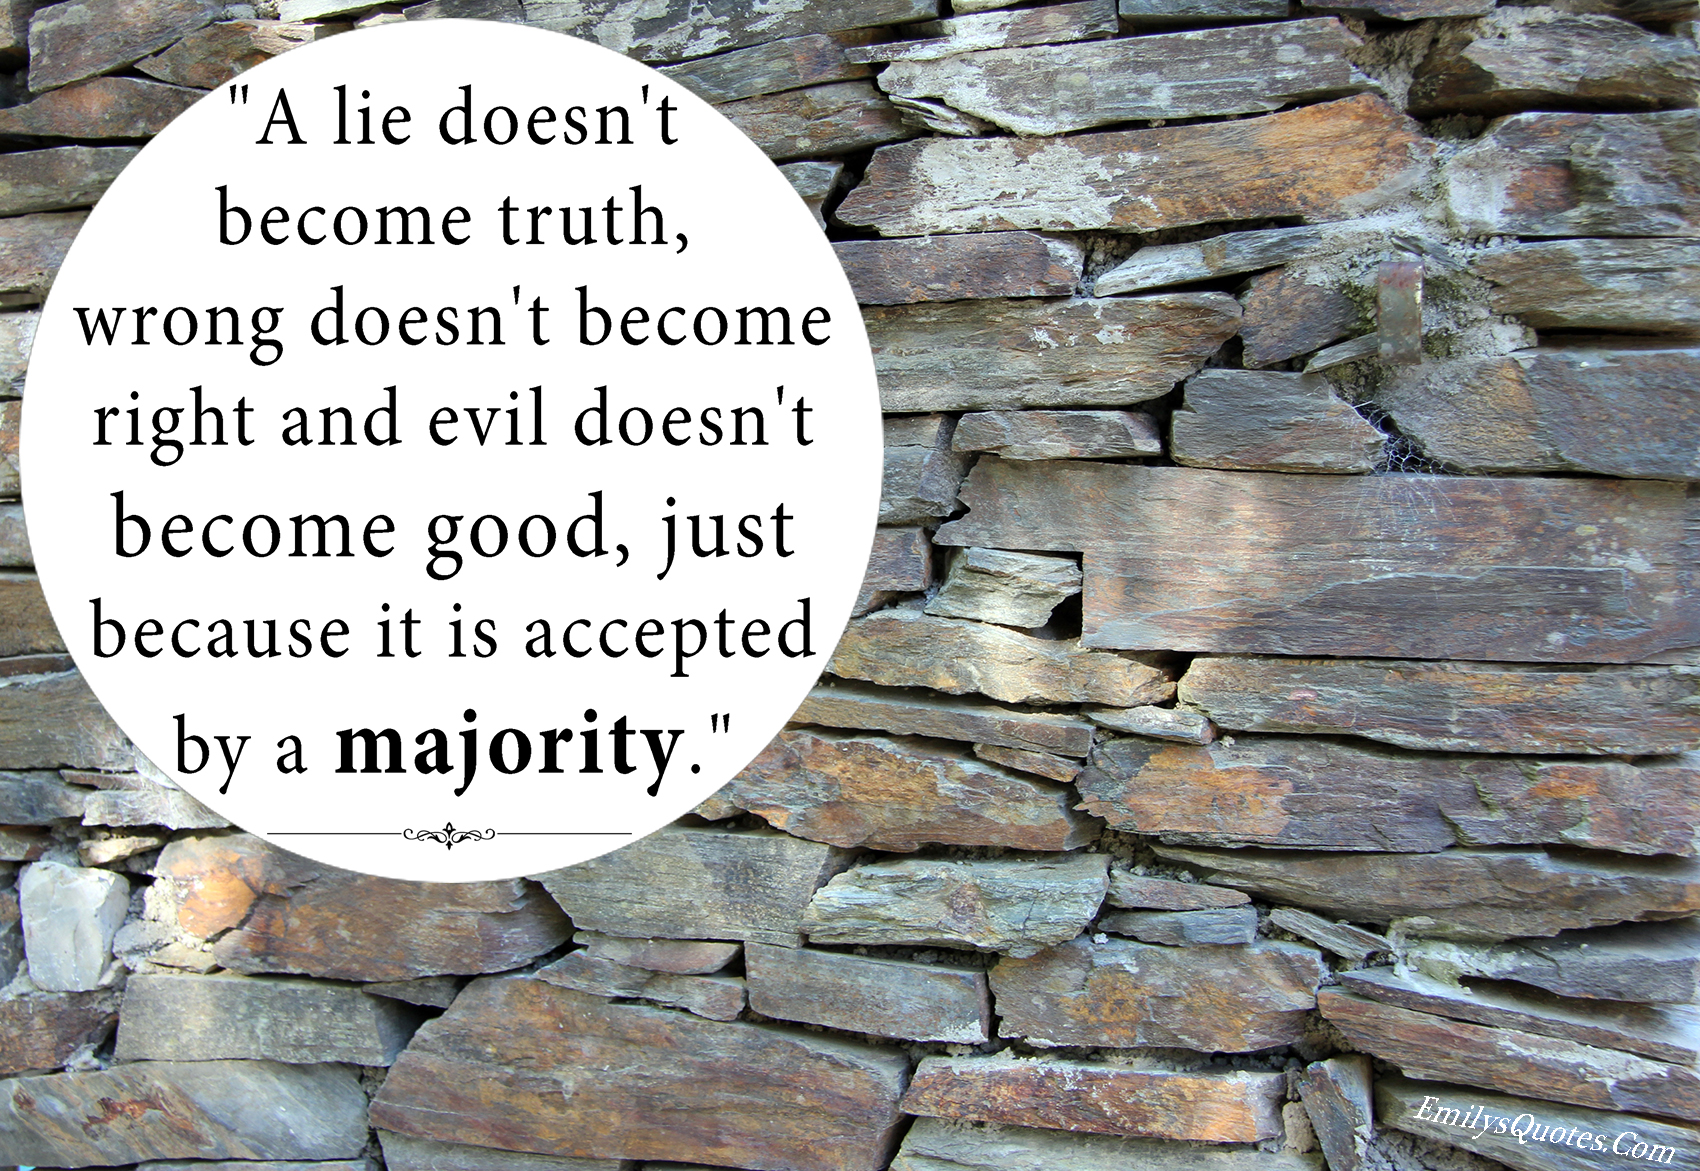 A lie doesn’t become truth, wrong doesn’t become right and evil doesn’t become good, just because it is accepted by a majority